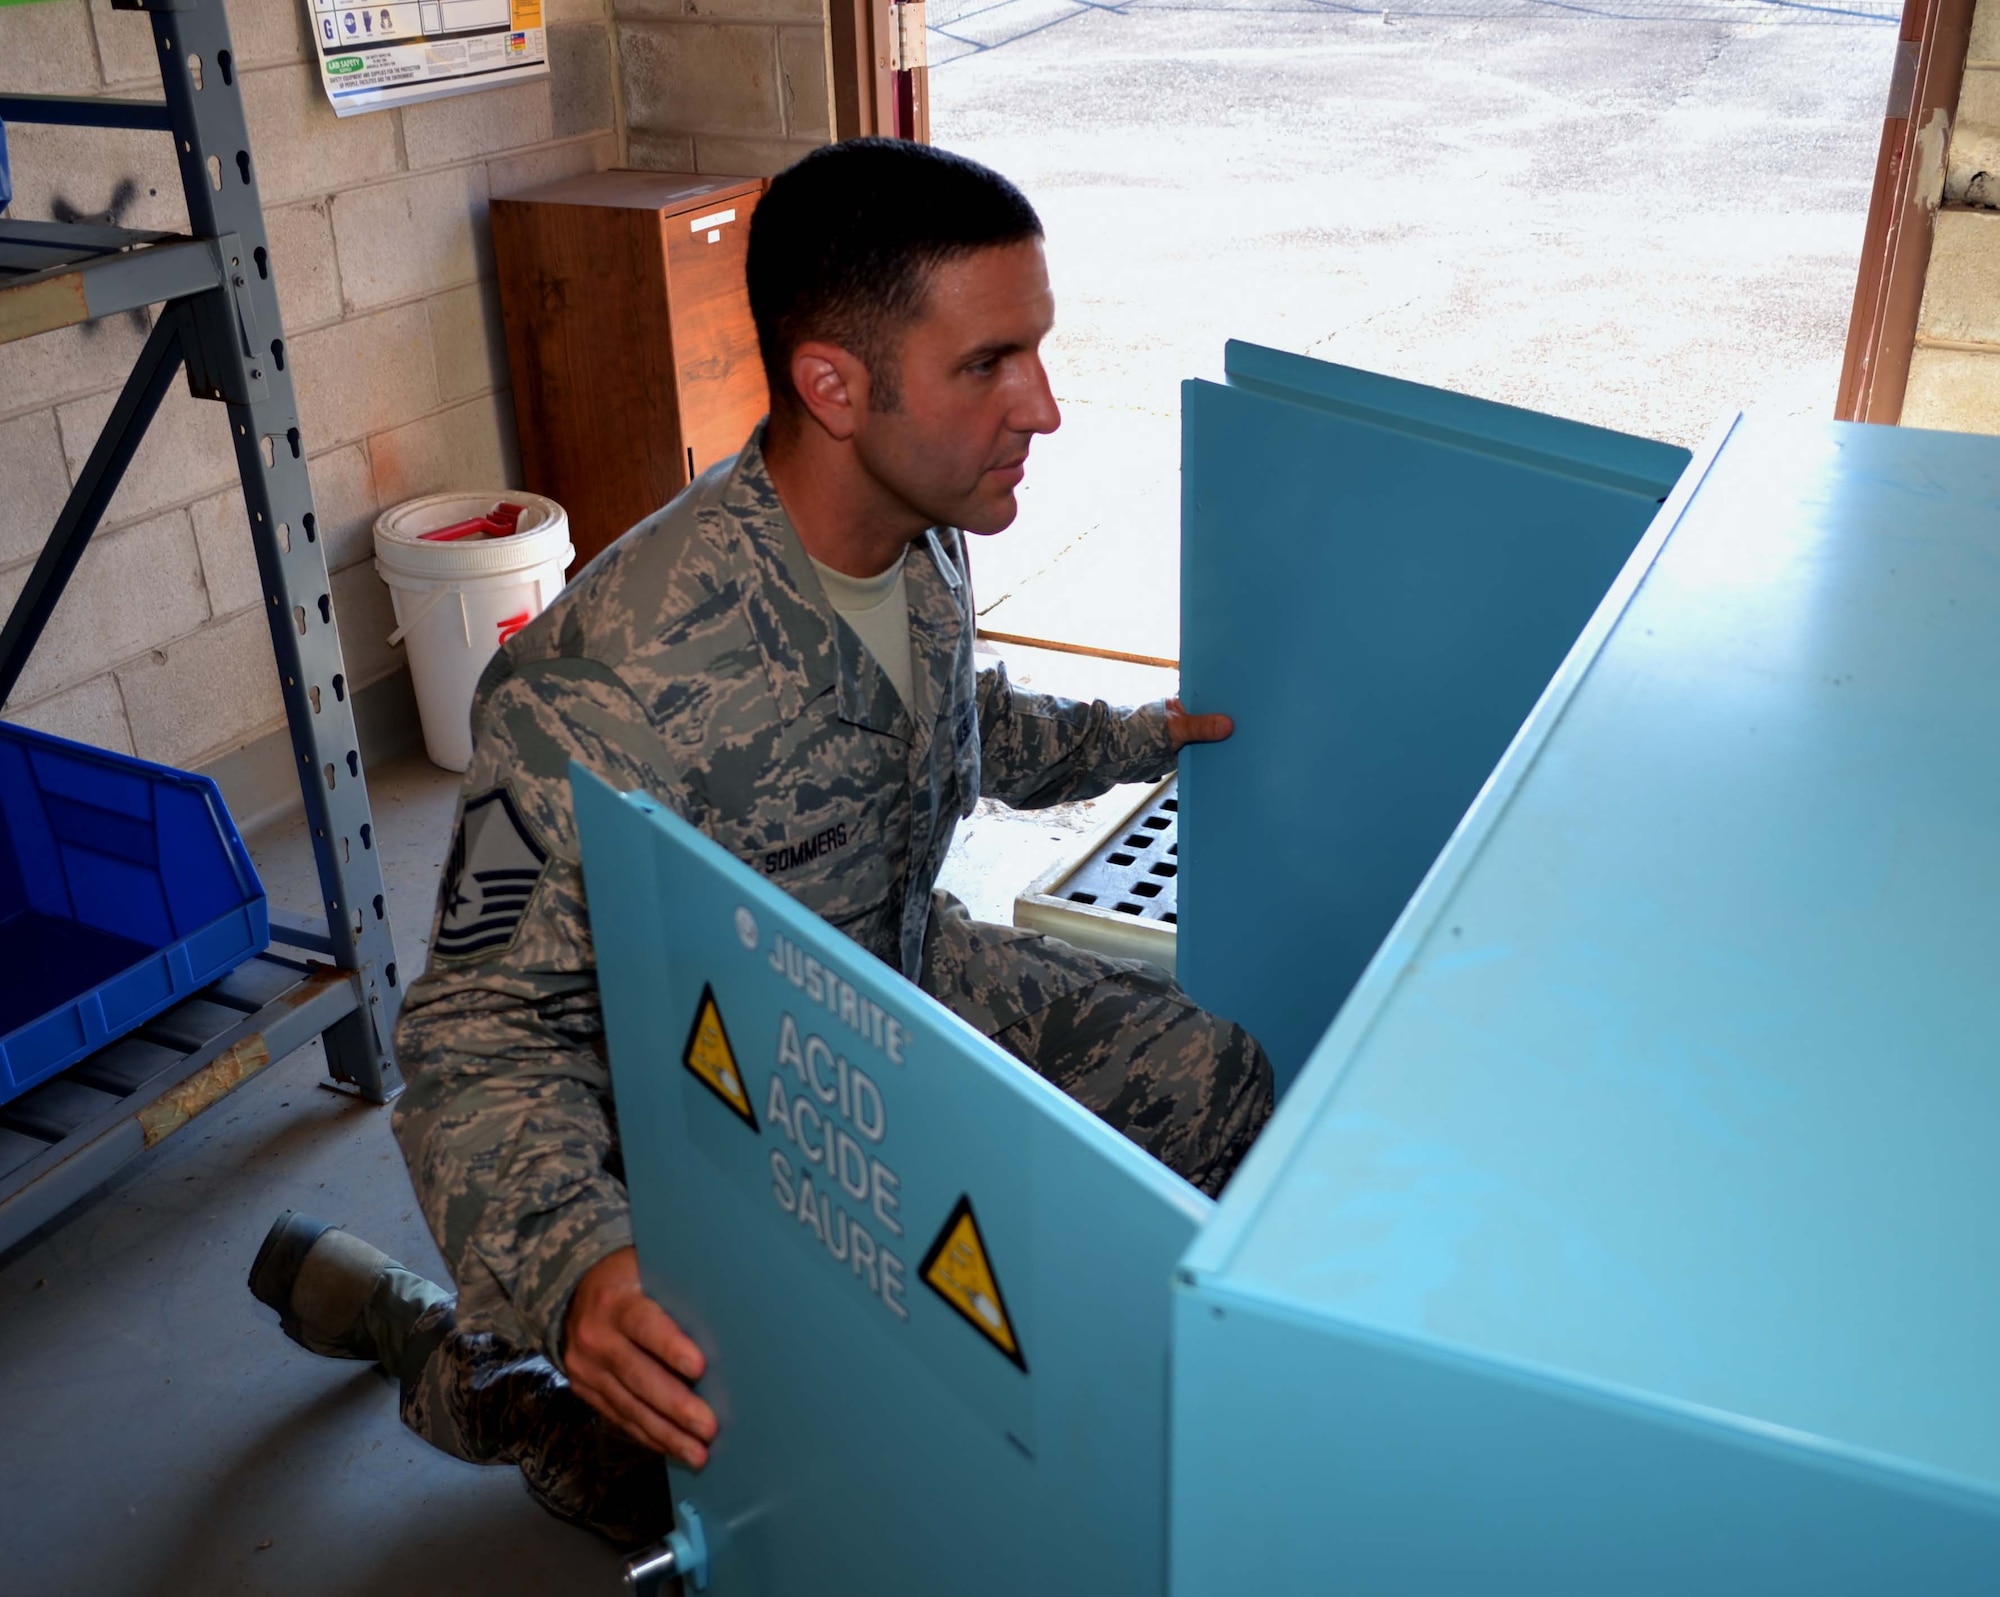 Master Sgt. Joe Sommers, from the 111th Logistics Readiness Squadron with a primary duty of manning the Hazardous Material (HazMat) Pharmacy opens a cabinet in the HazMat Pharmacy at Horsham Air Guard Station, Pa., July 8, 2016. The 111th LRS has managed to maintain an empty HazMat Pharmacy, which has led to a significant decrease in the installation's creation of hazardous waste. (U.S. Air National Guard photo by Tech. Sgt. Andria Allmond)